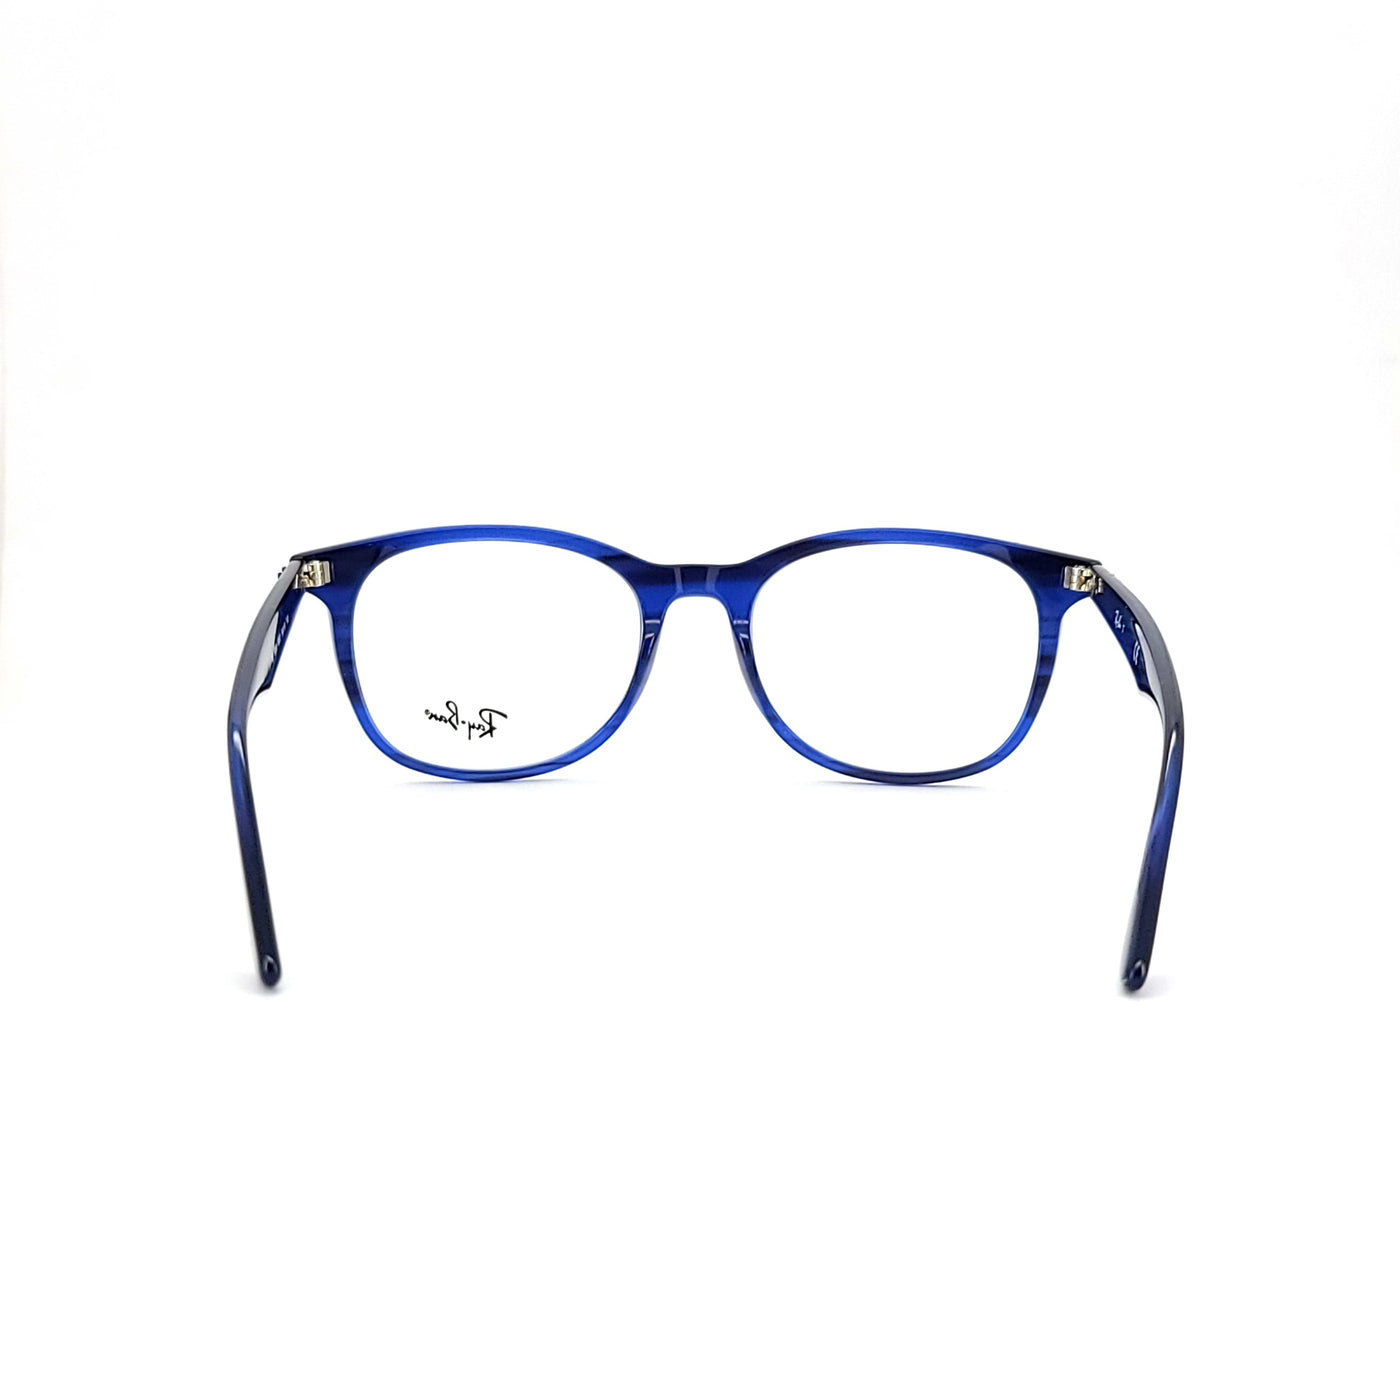 Ray-Ban Highstreet RB5356/8053_54 | Eyeglasses - Vision Express Optical Philippines